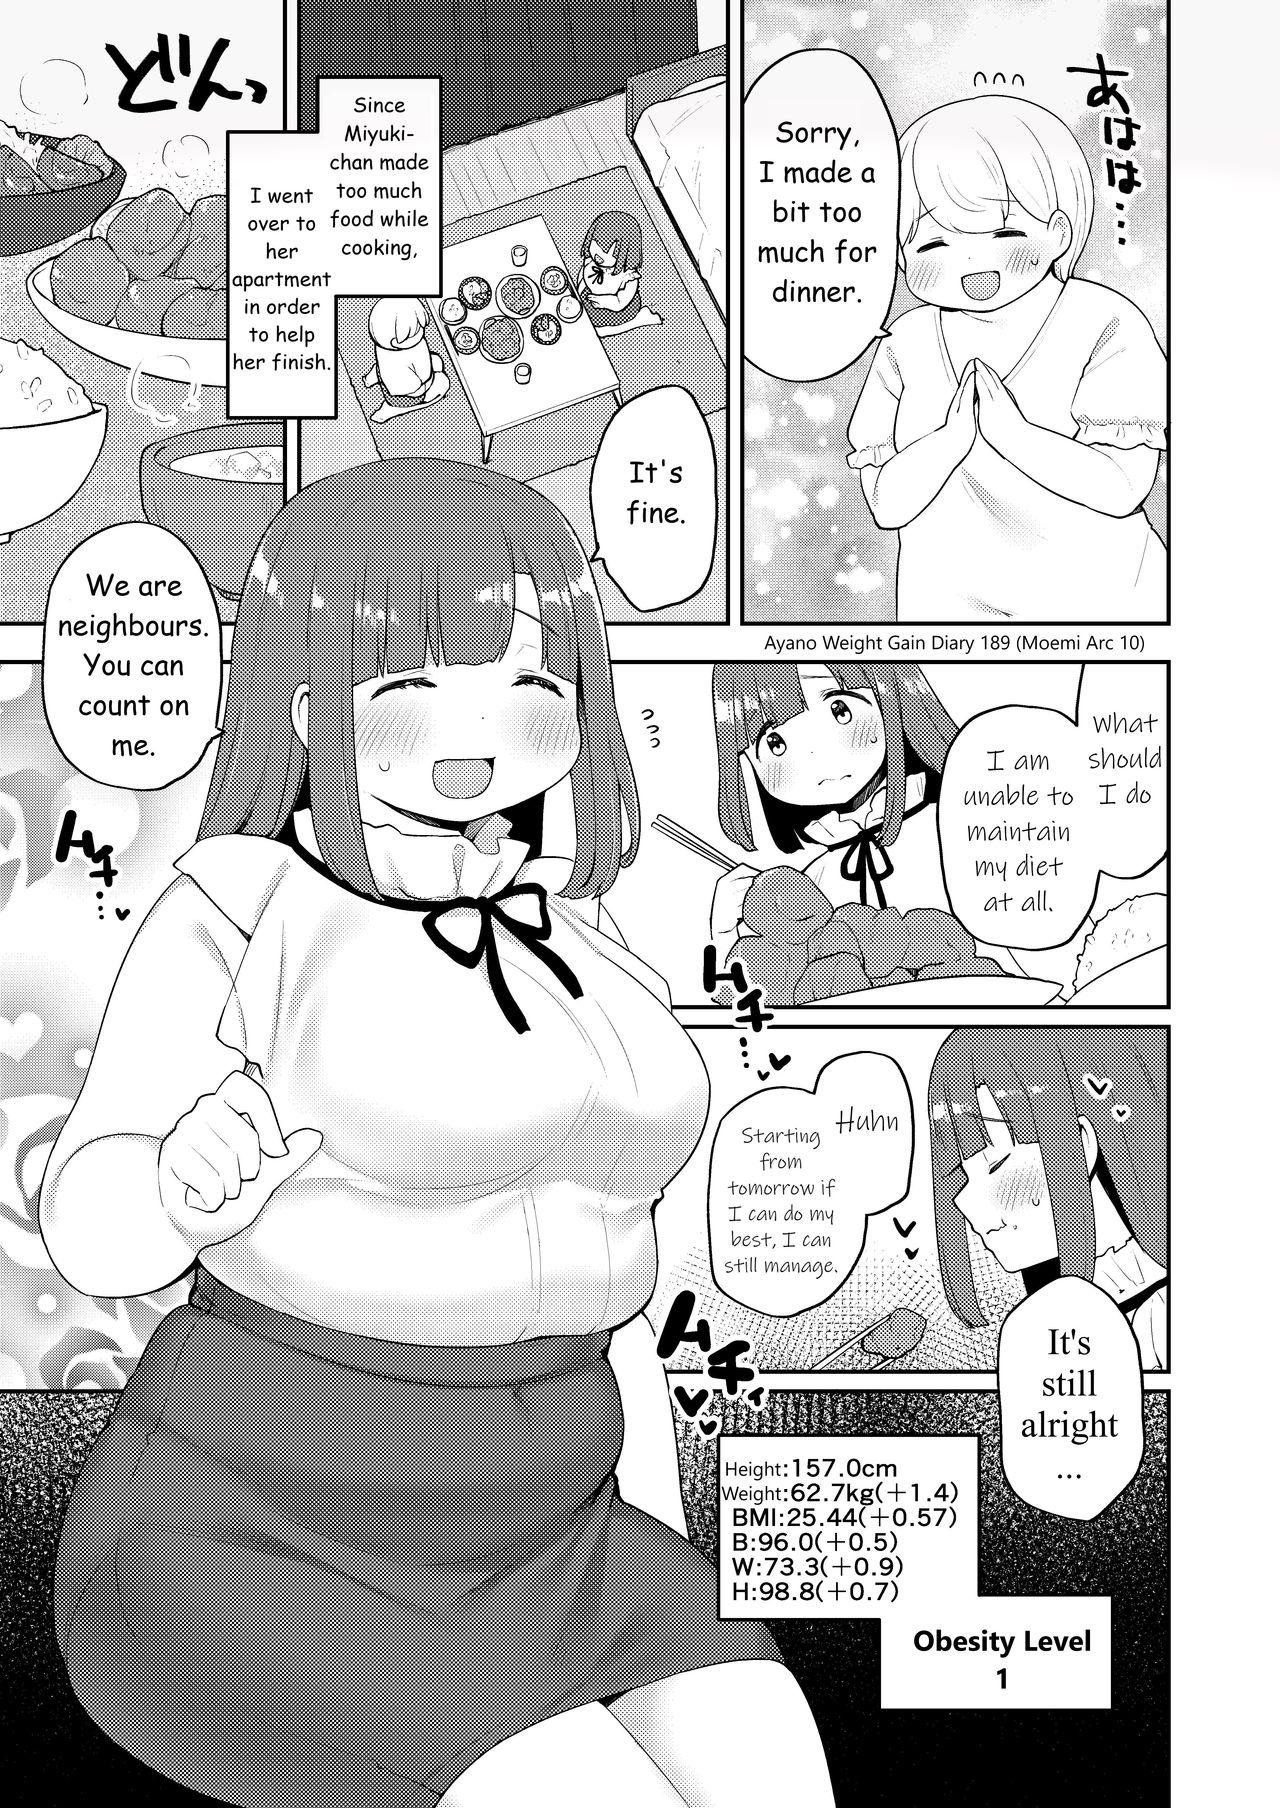 Coed Ayano's Weight Gain Diary Baile - Page 189